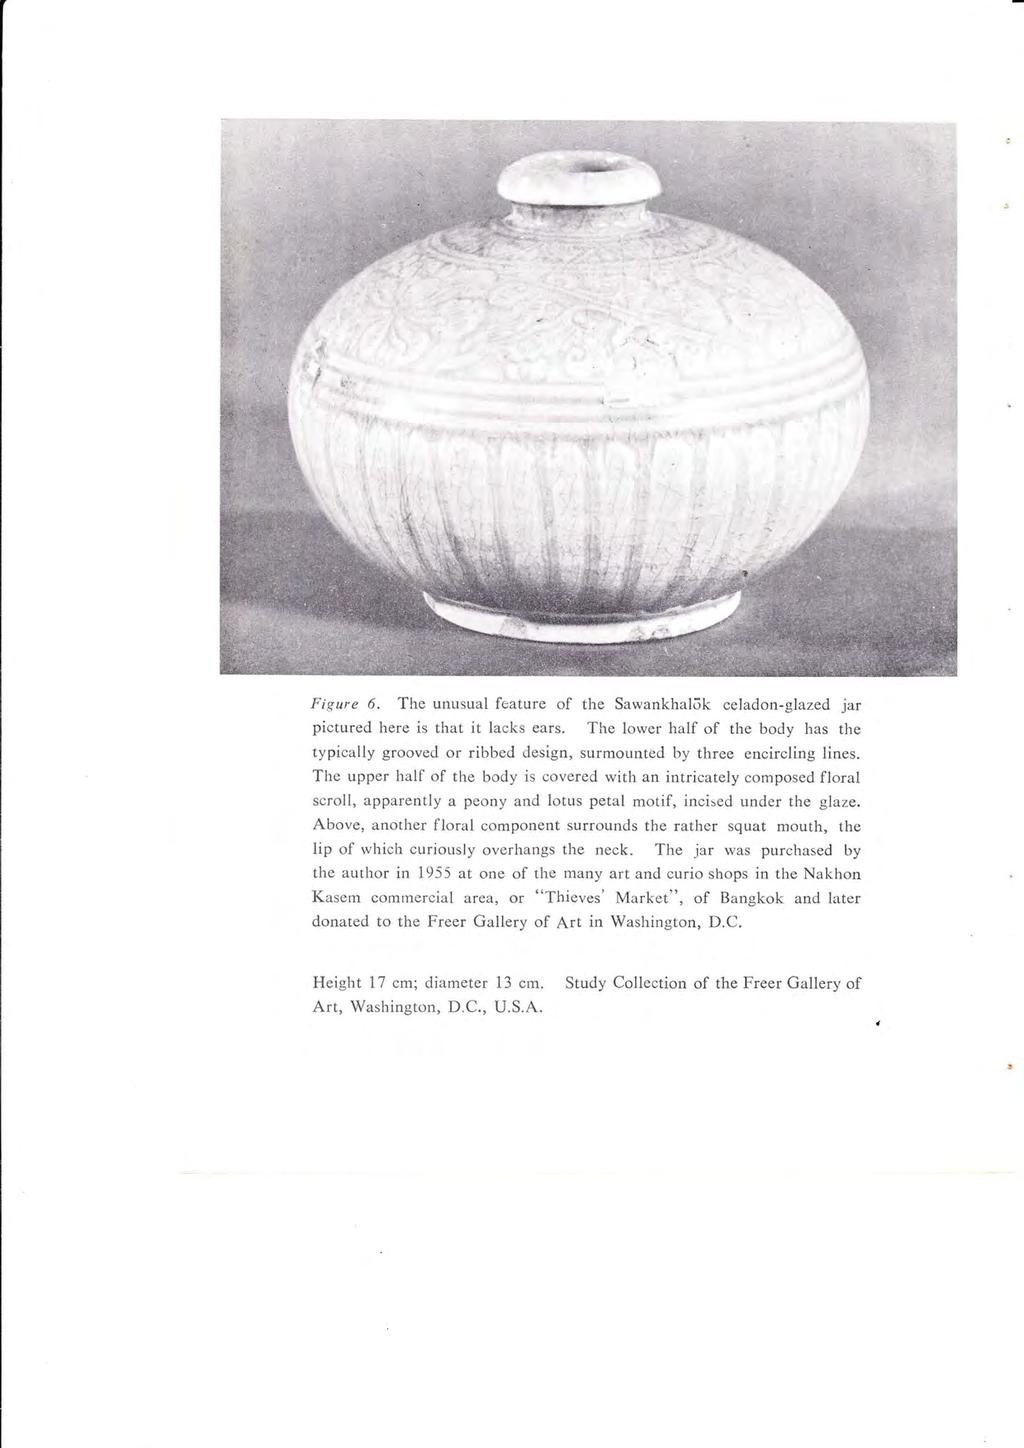 Figure 6. The unusual feature of the Sawankhalok celadon-glazed jar pictured here is that it lacks ears.